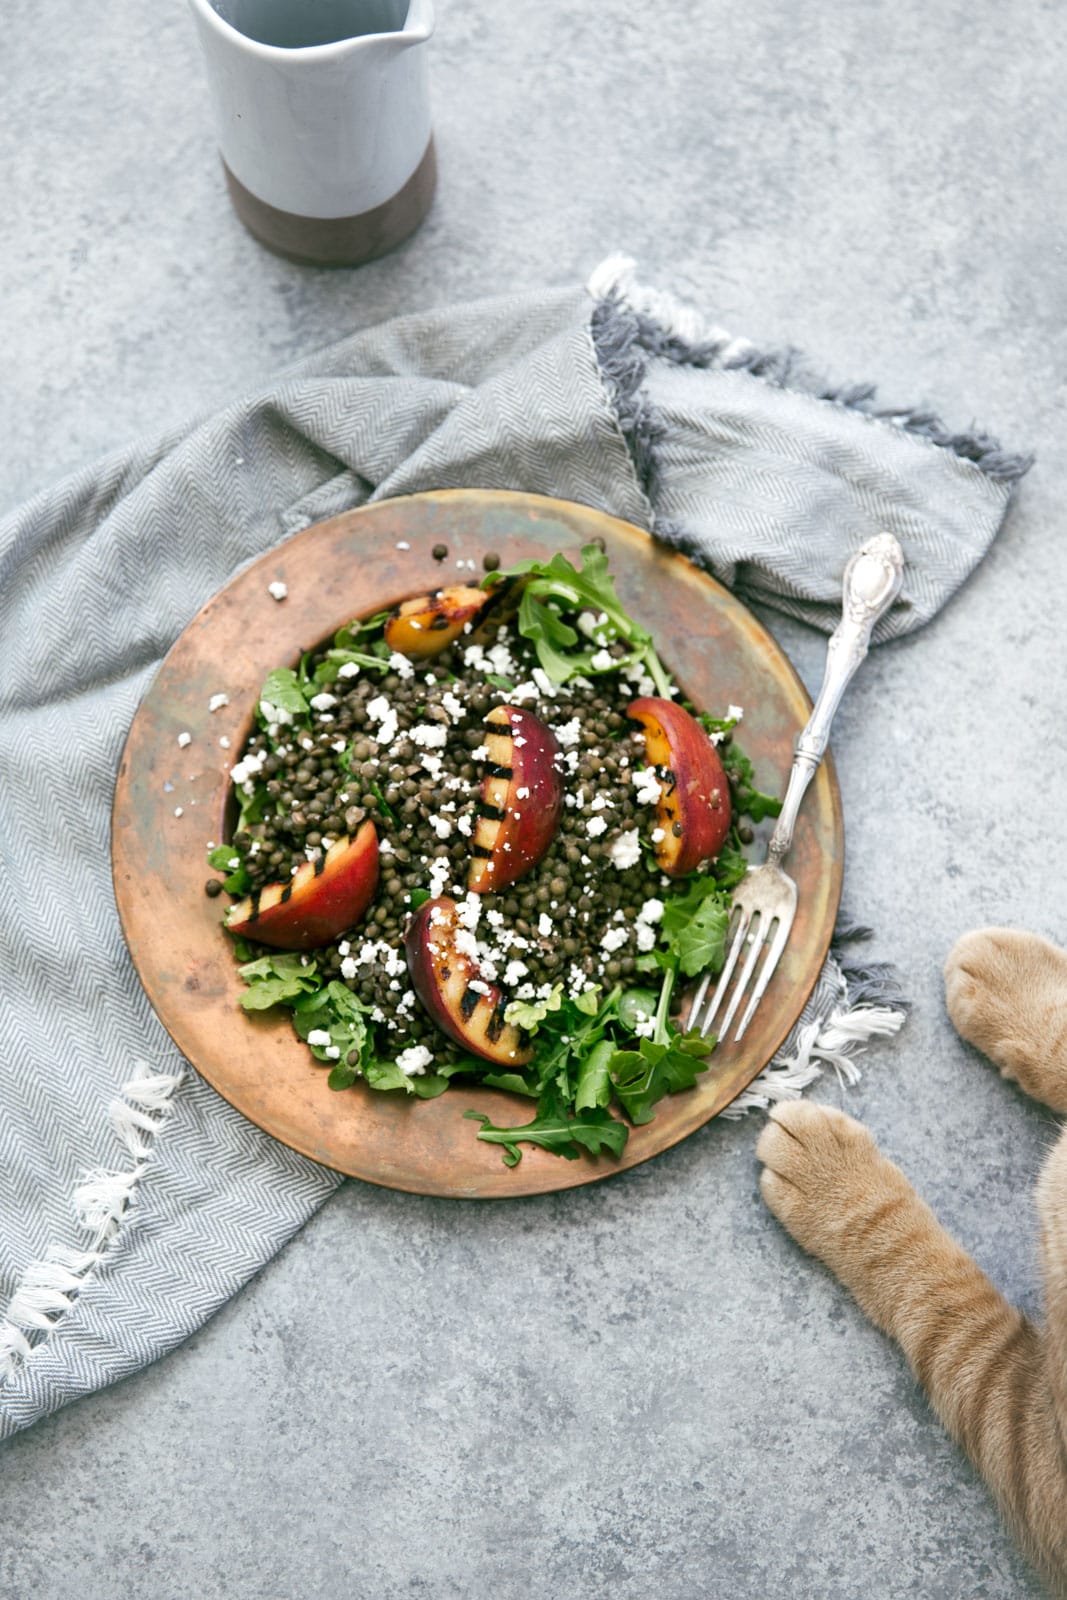 Take advantage of peach season with this green lentil salad with char-grilled peaches, goat cheese, and rosé vinaigrette.